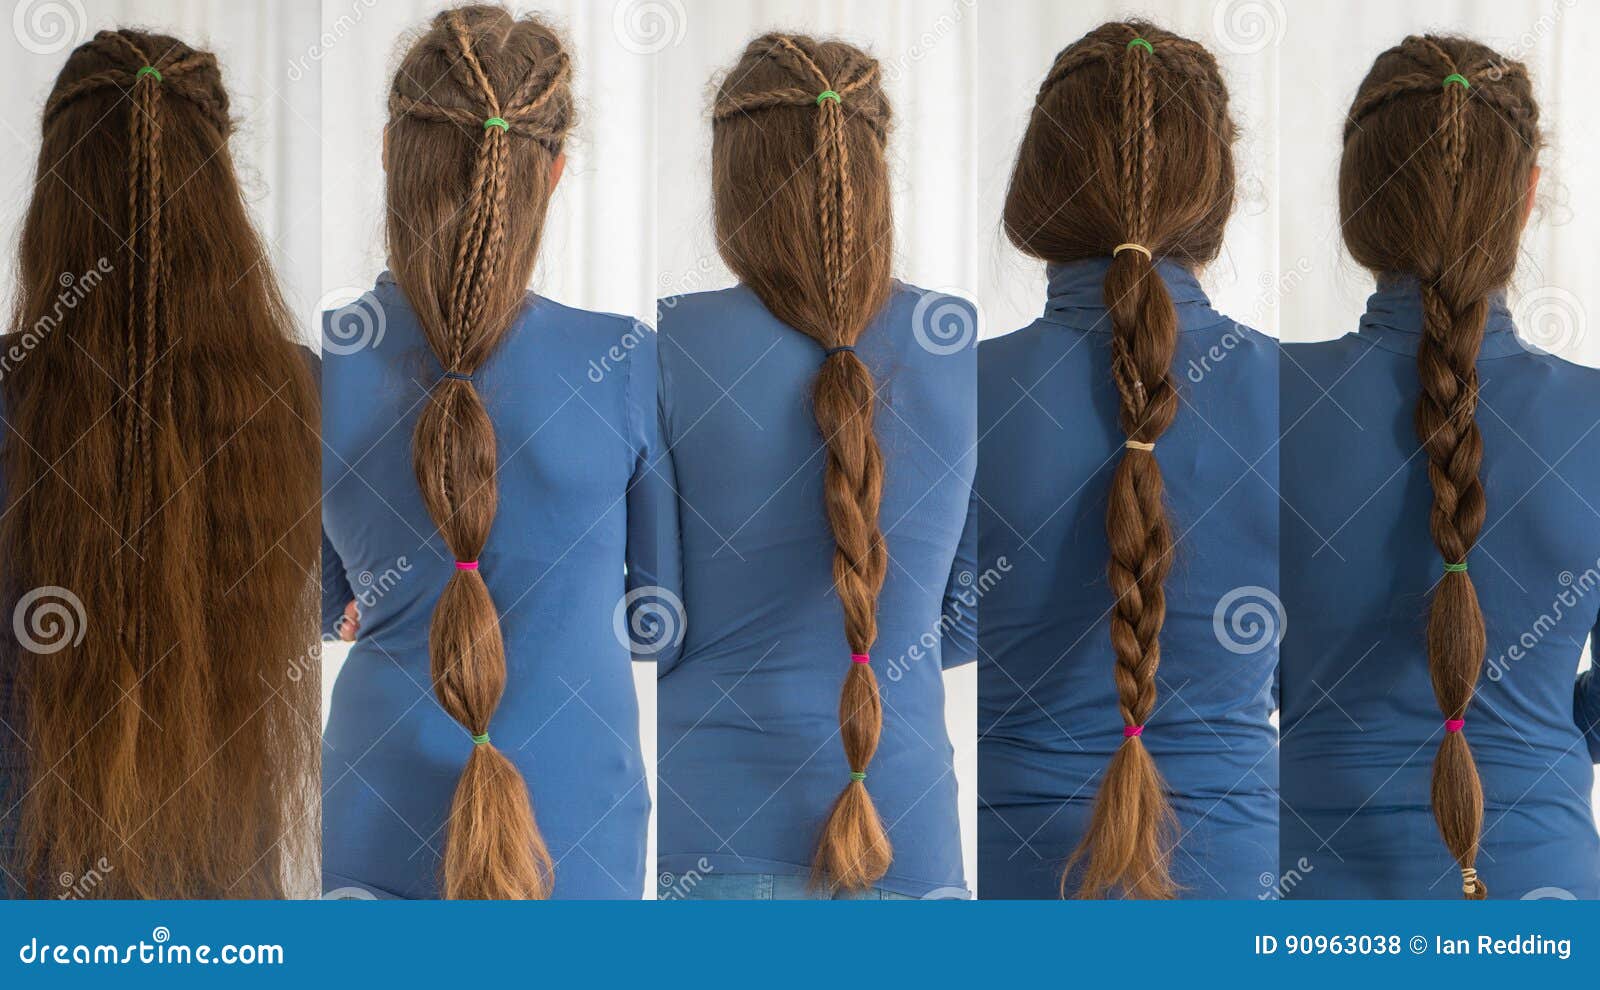 Renaissance Hairstyles for Long Hair Stock Photo - Image of plait,  collection: 90963038